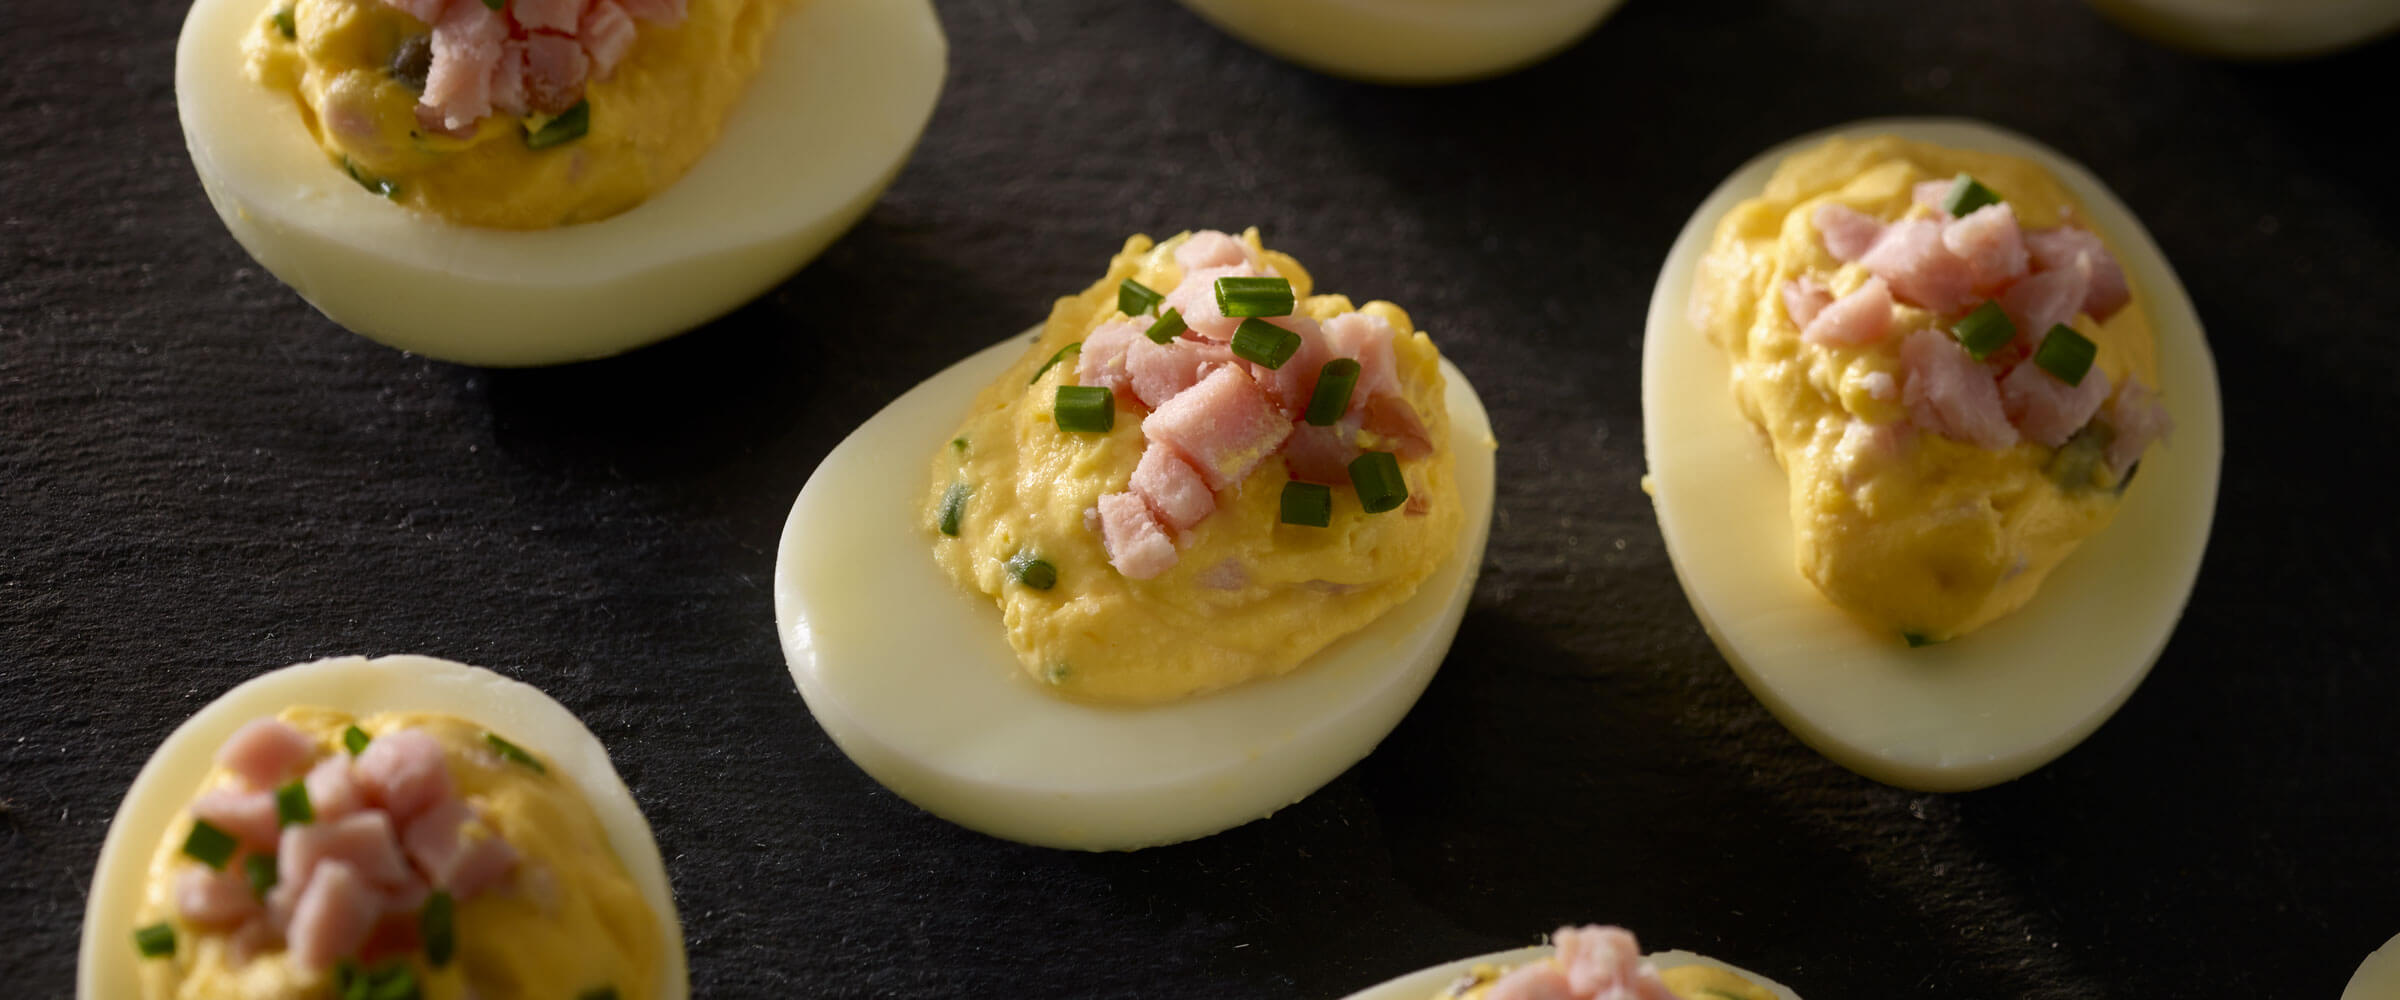 Deviled Eggs with Canadian Bacon topped with chives